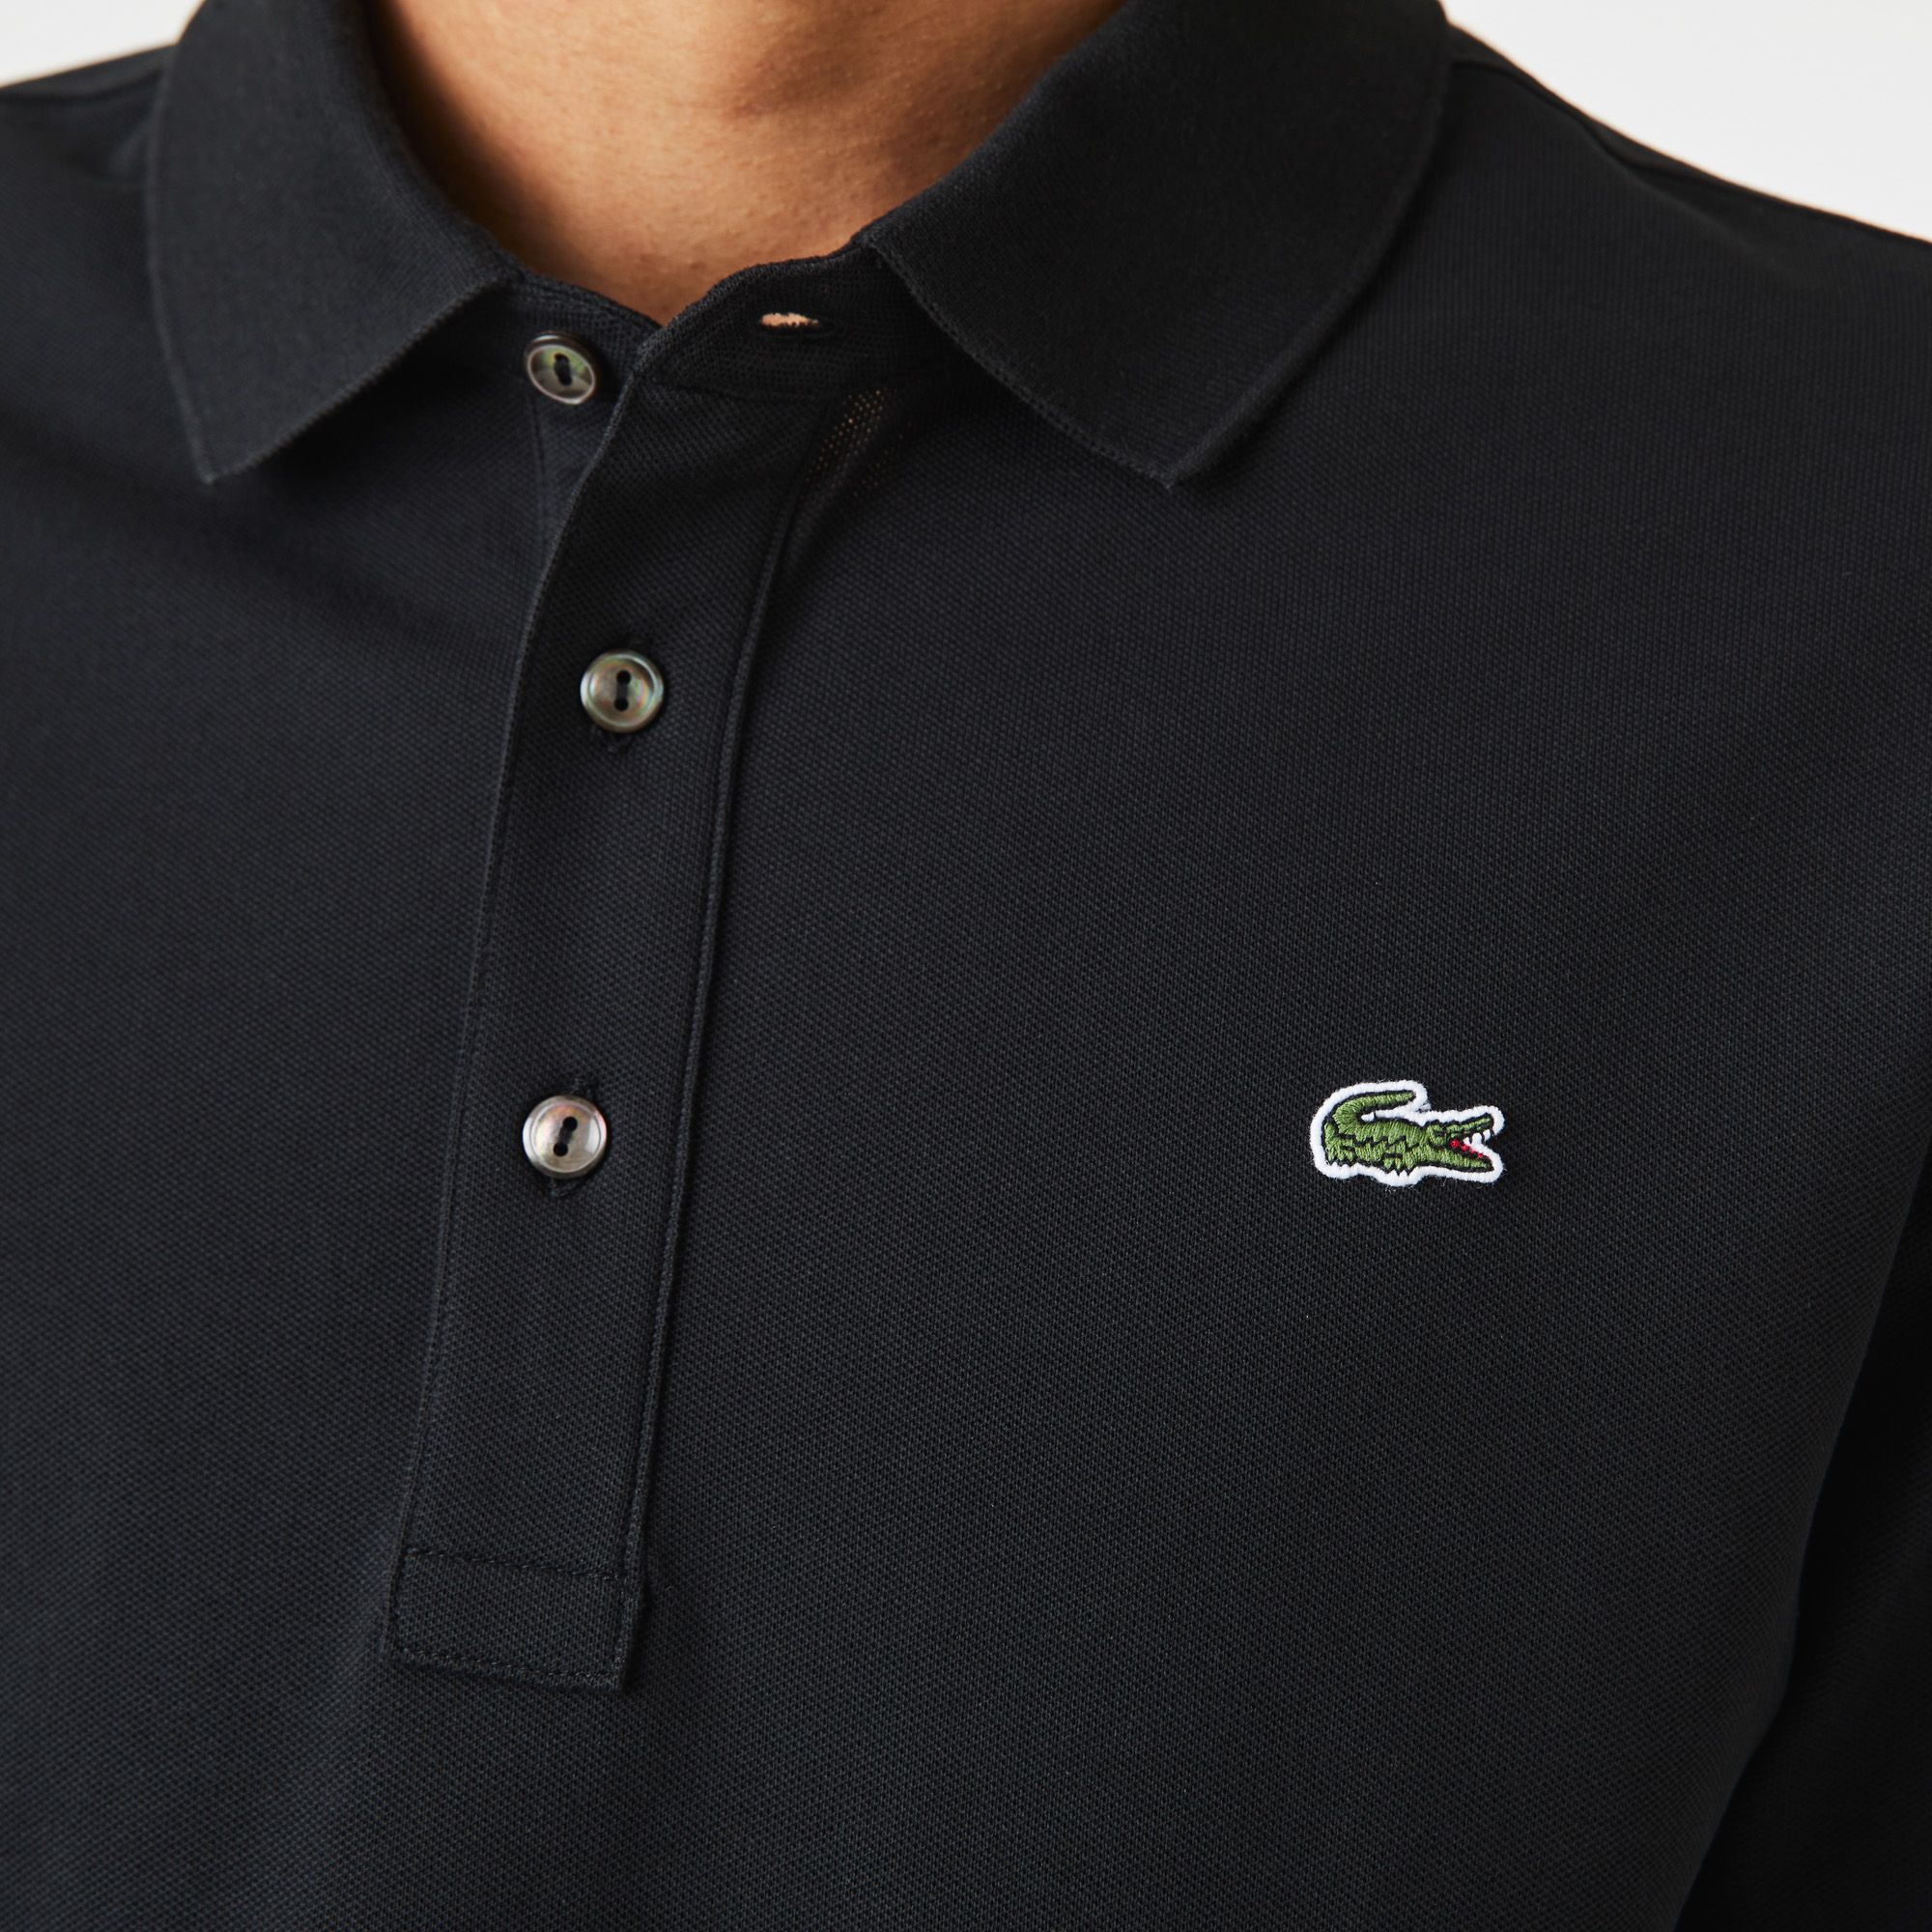  Lacoste Long Sleeved Slim Fit Stretch Polo Shirt - Black 